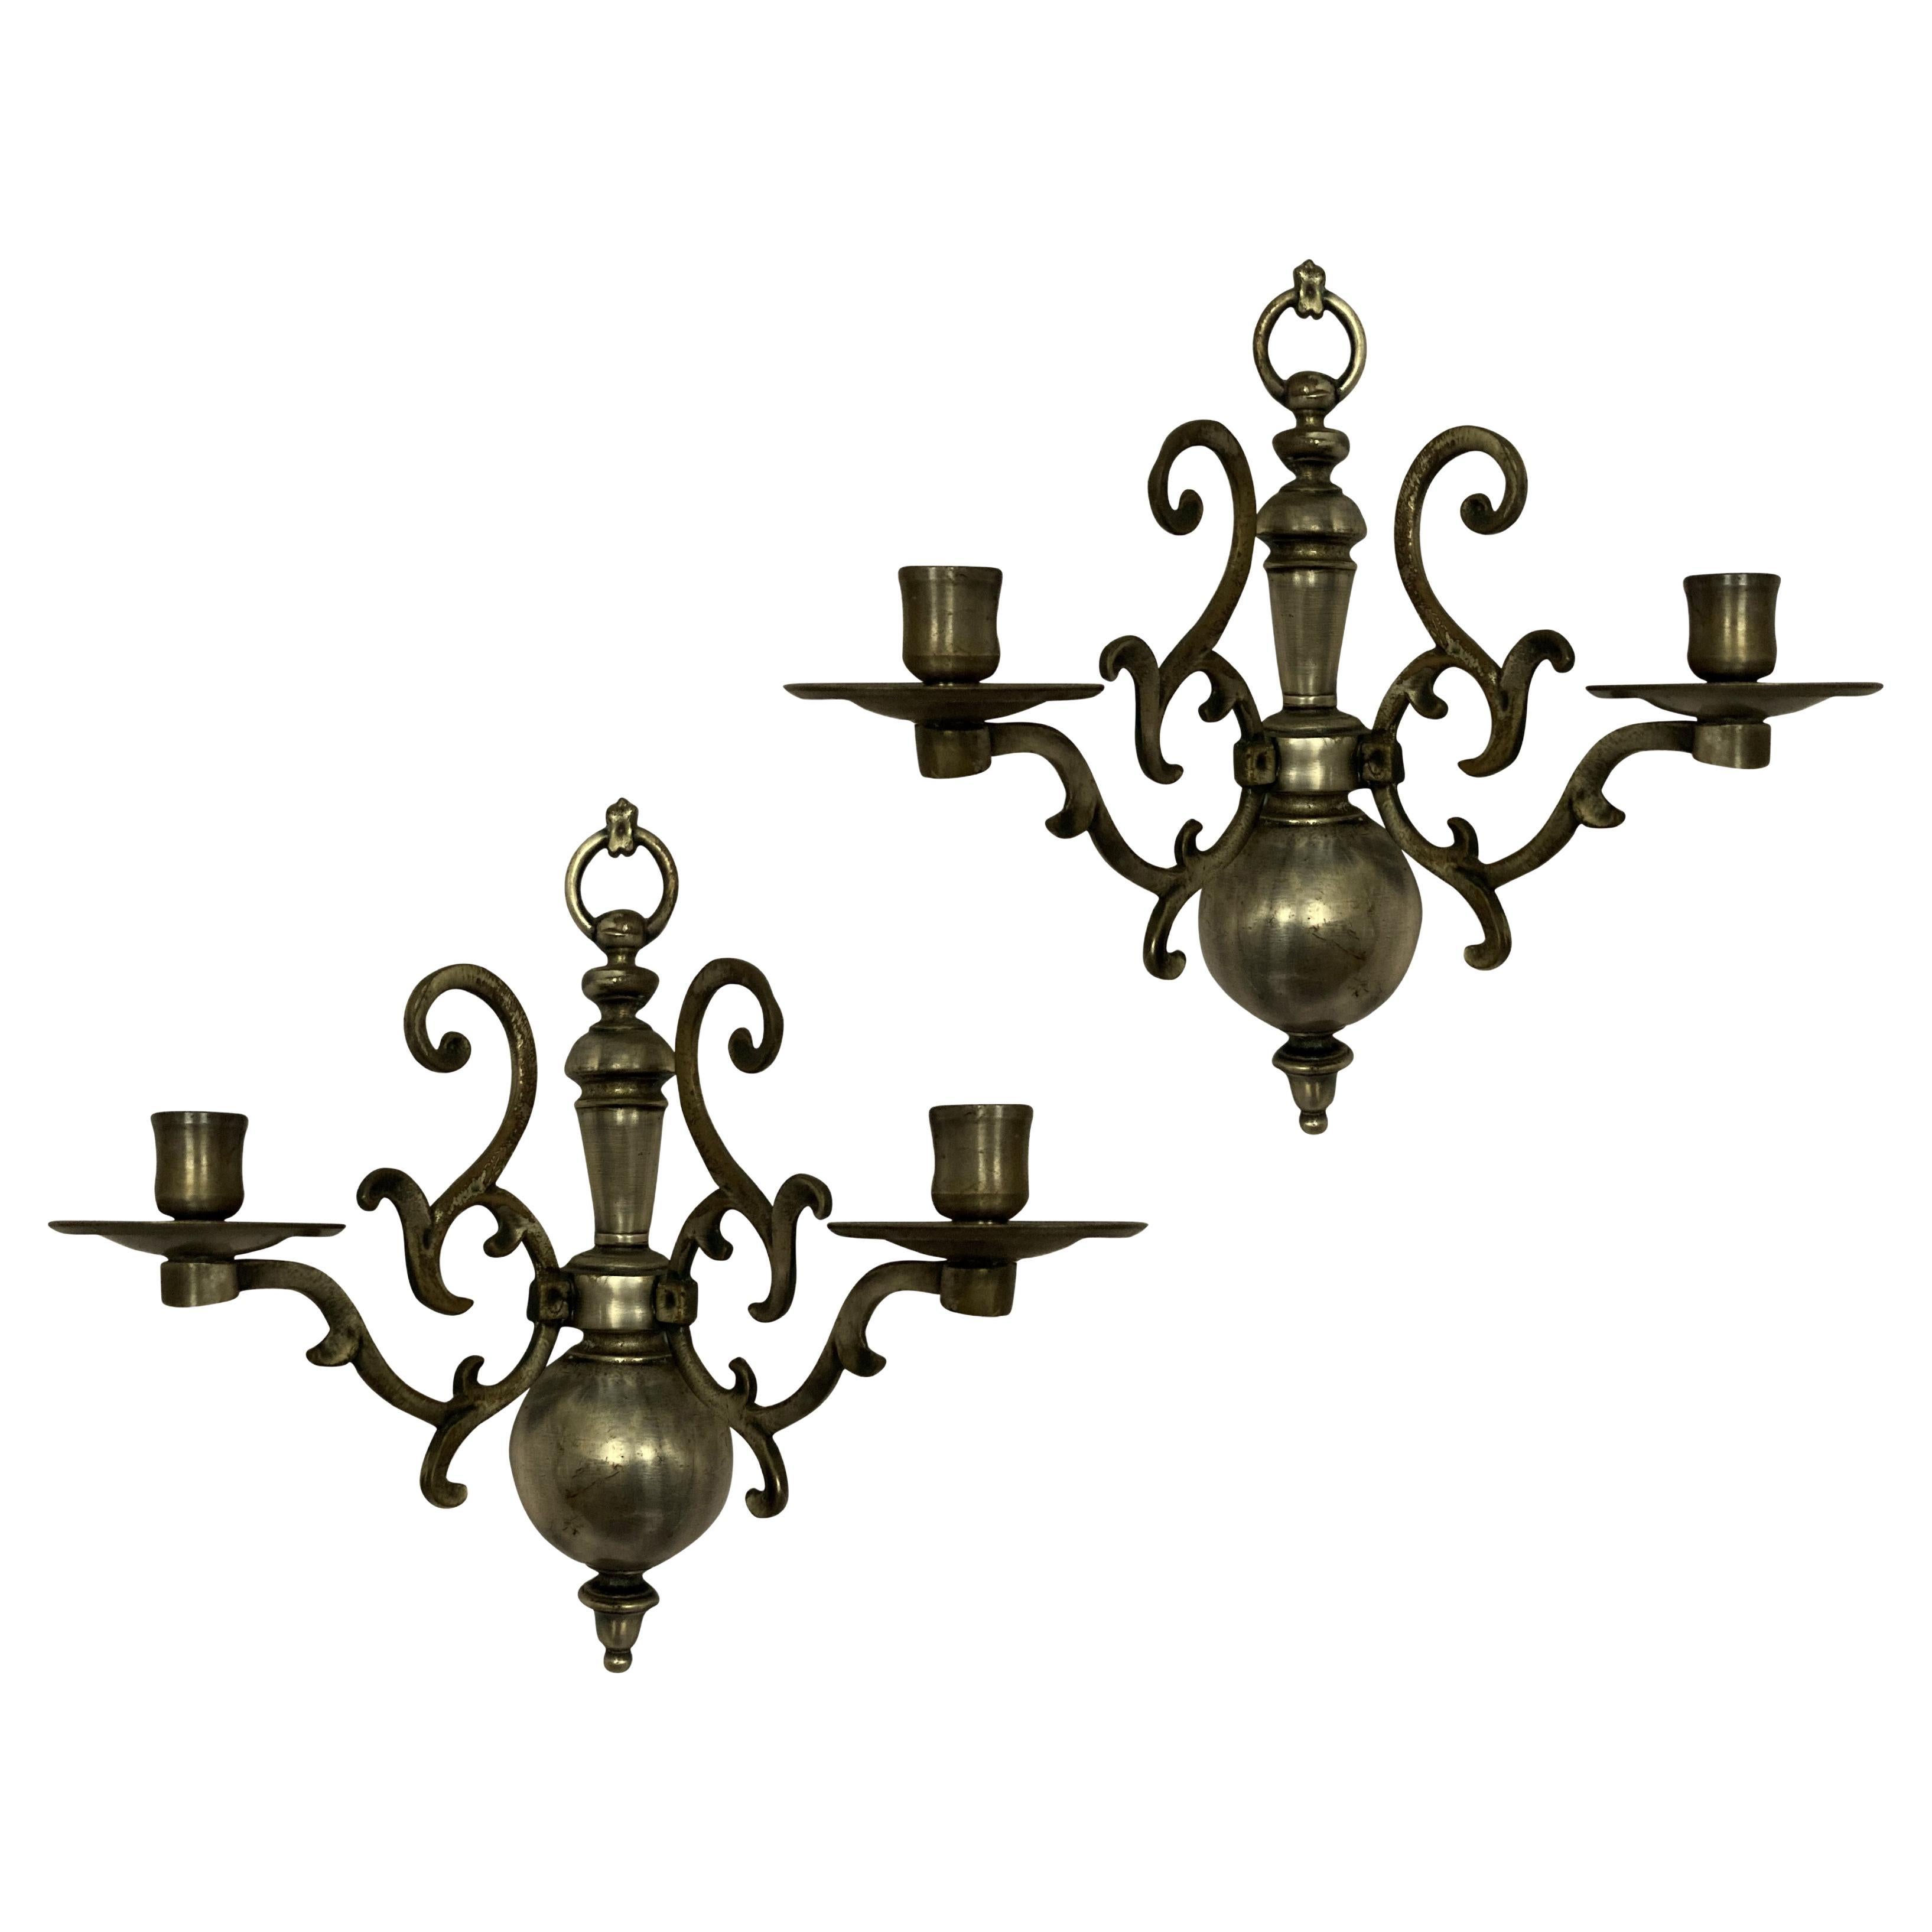 Pair of Flemish Silver Plated Wall Sconces For Sale